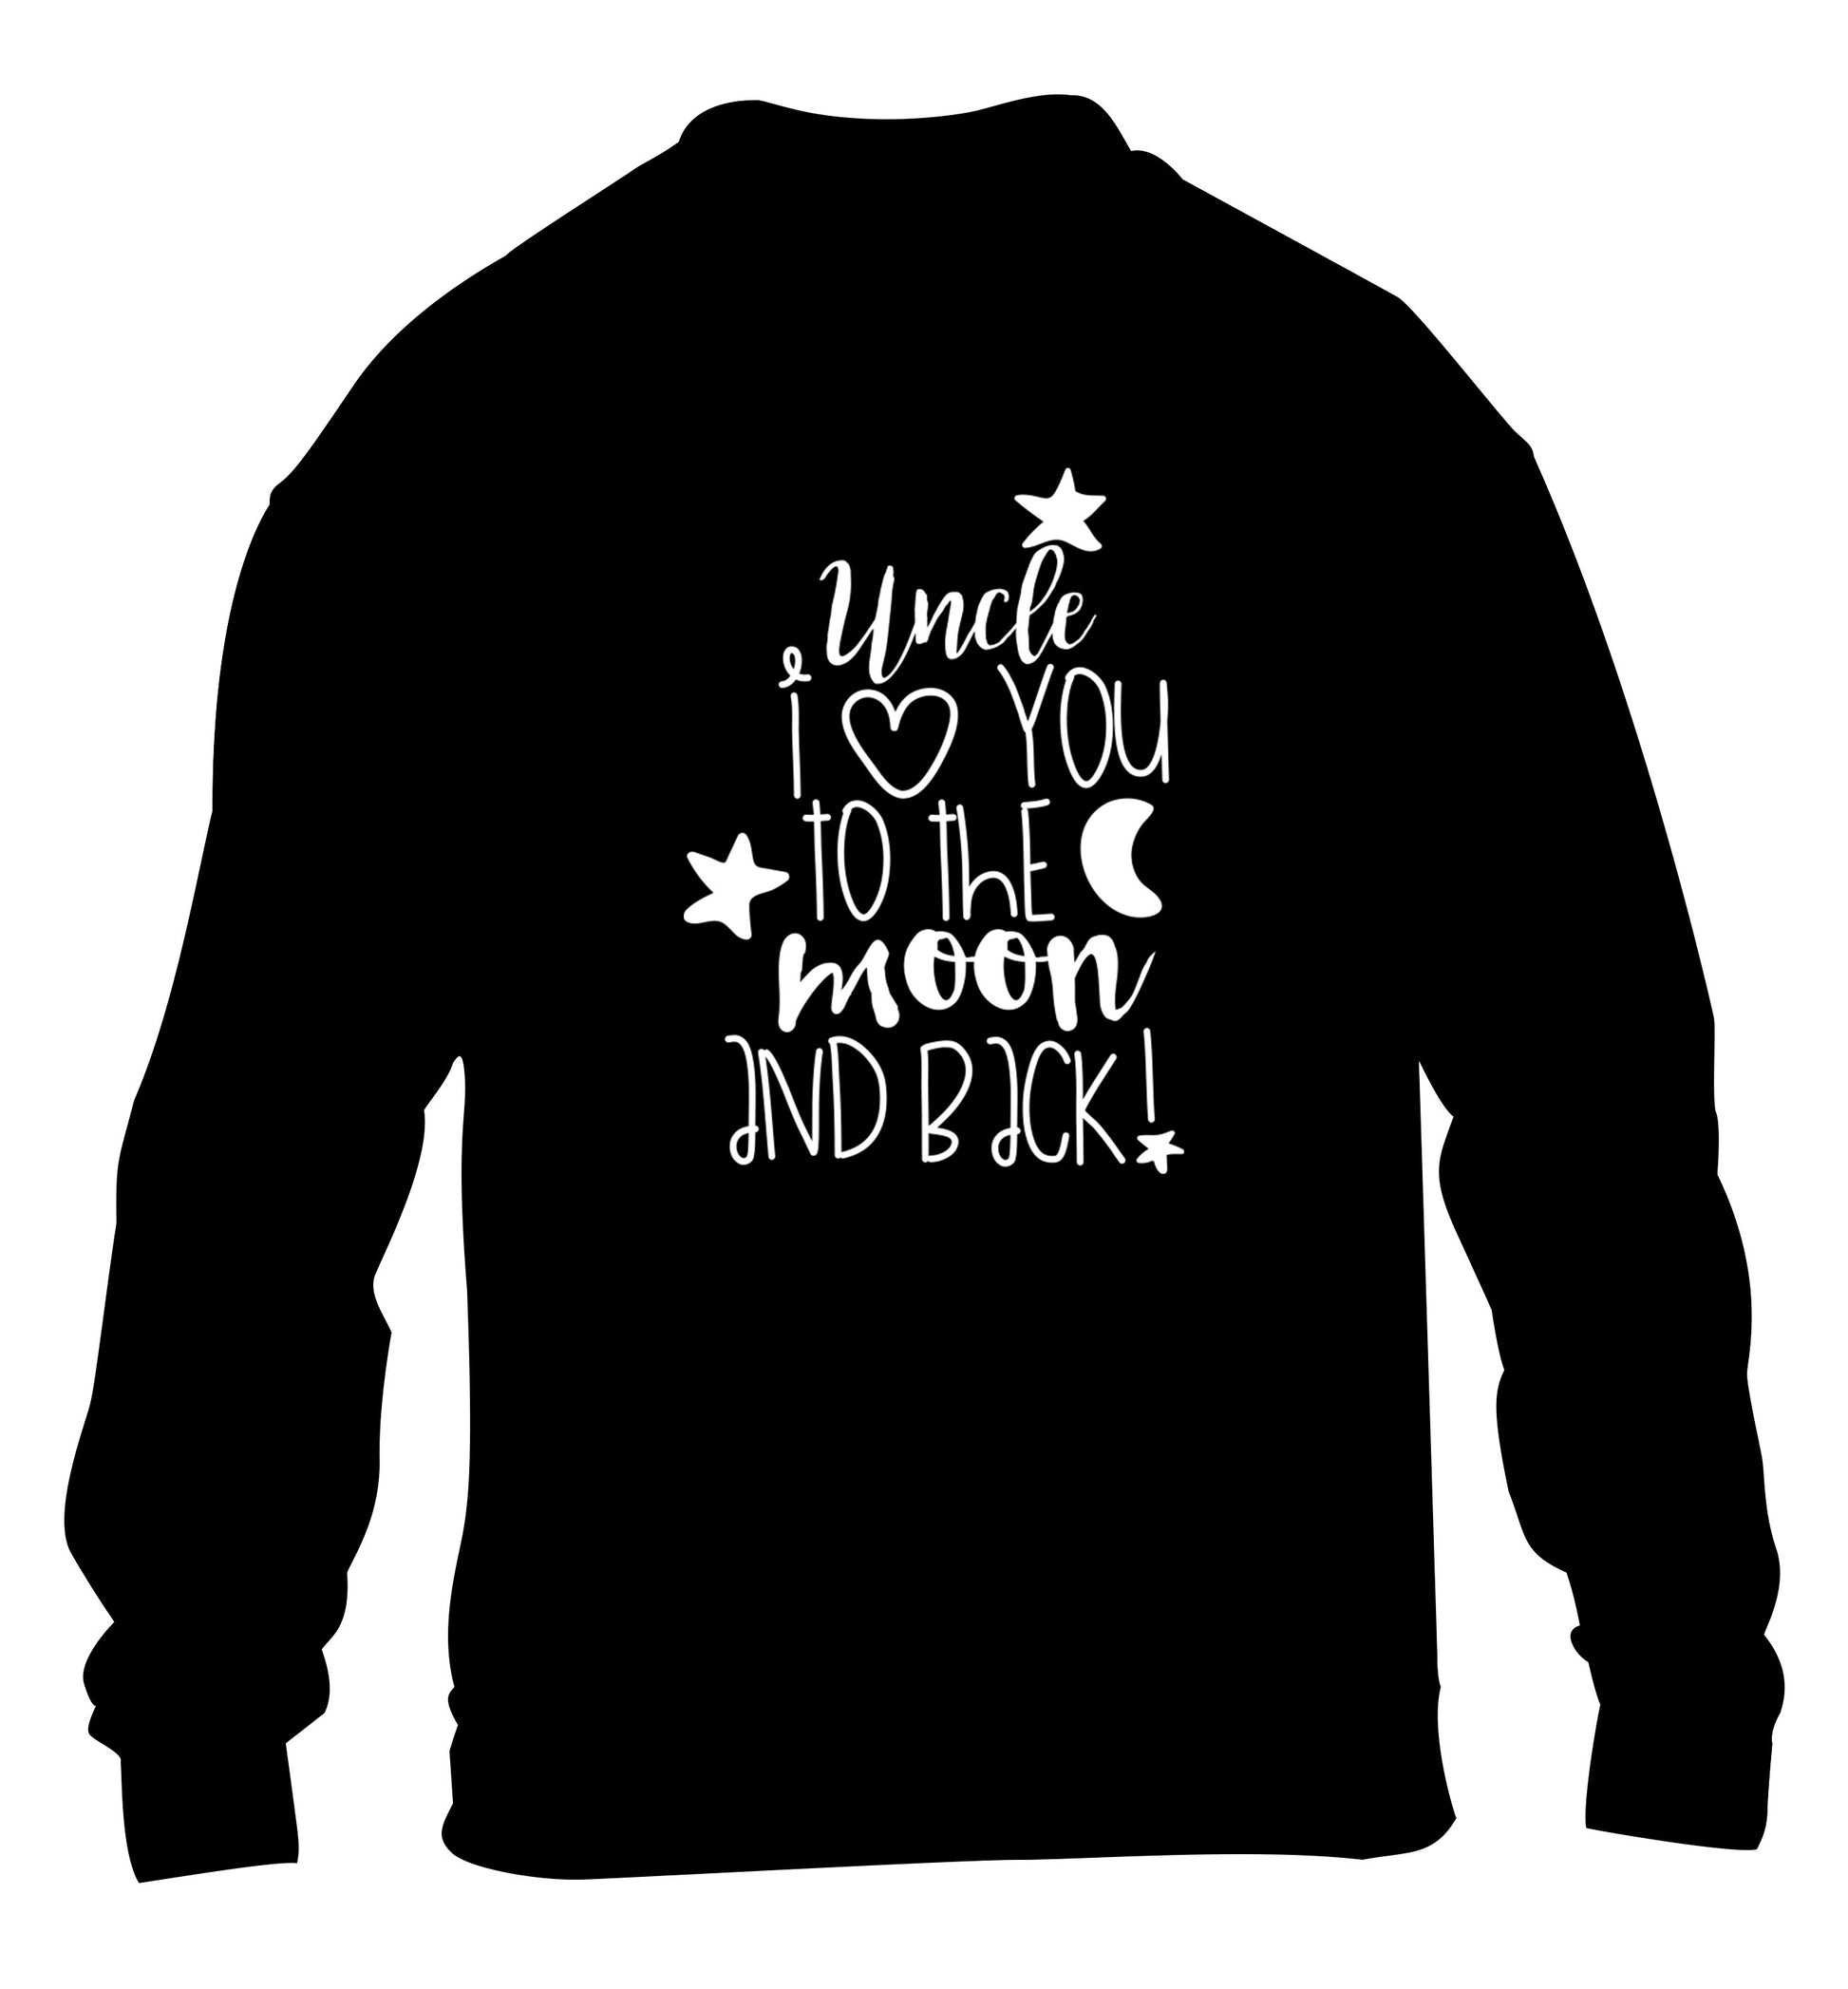 Uncle I love you to the moon and back children's black  sweater 12-14 Years